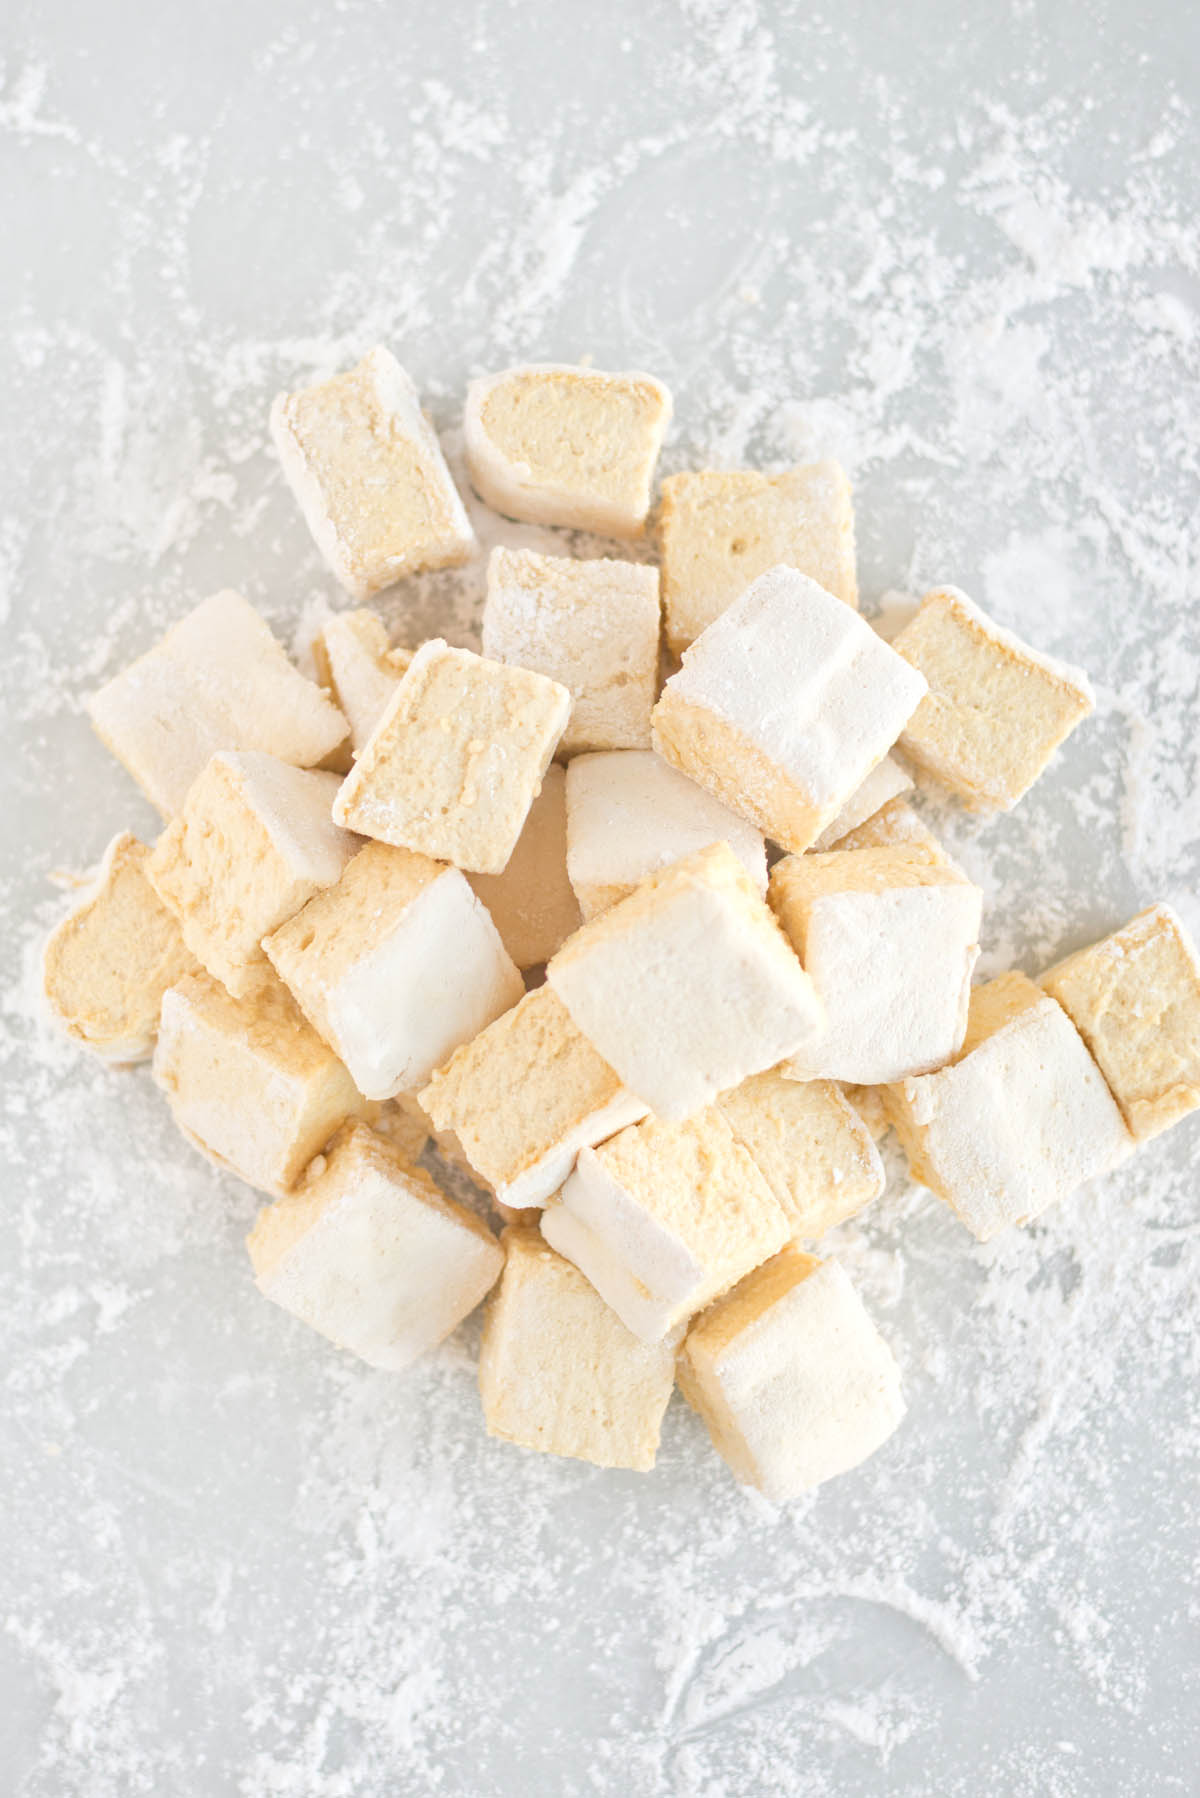 Quick 5-ingredient healthy homemade Marshmallow Recipes